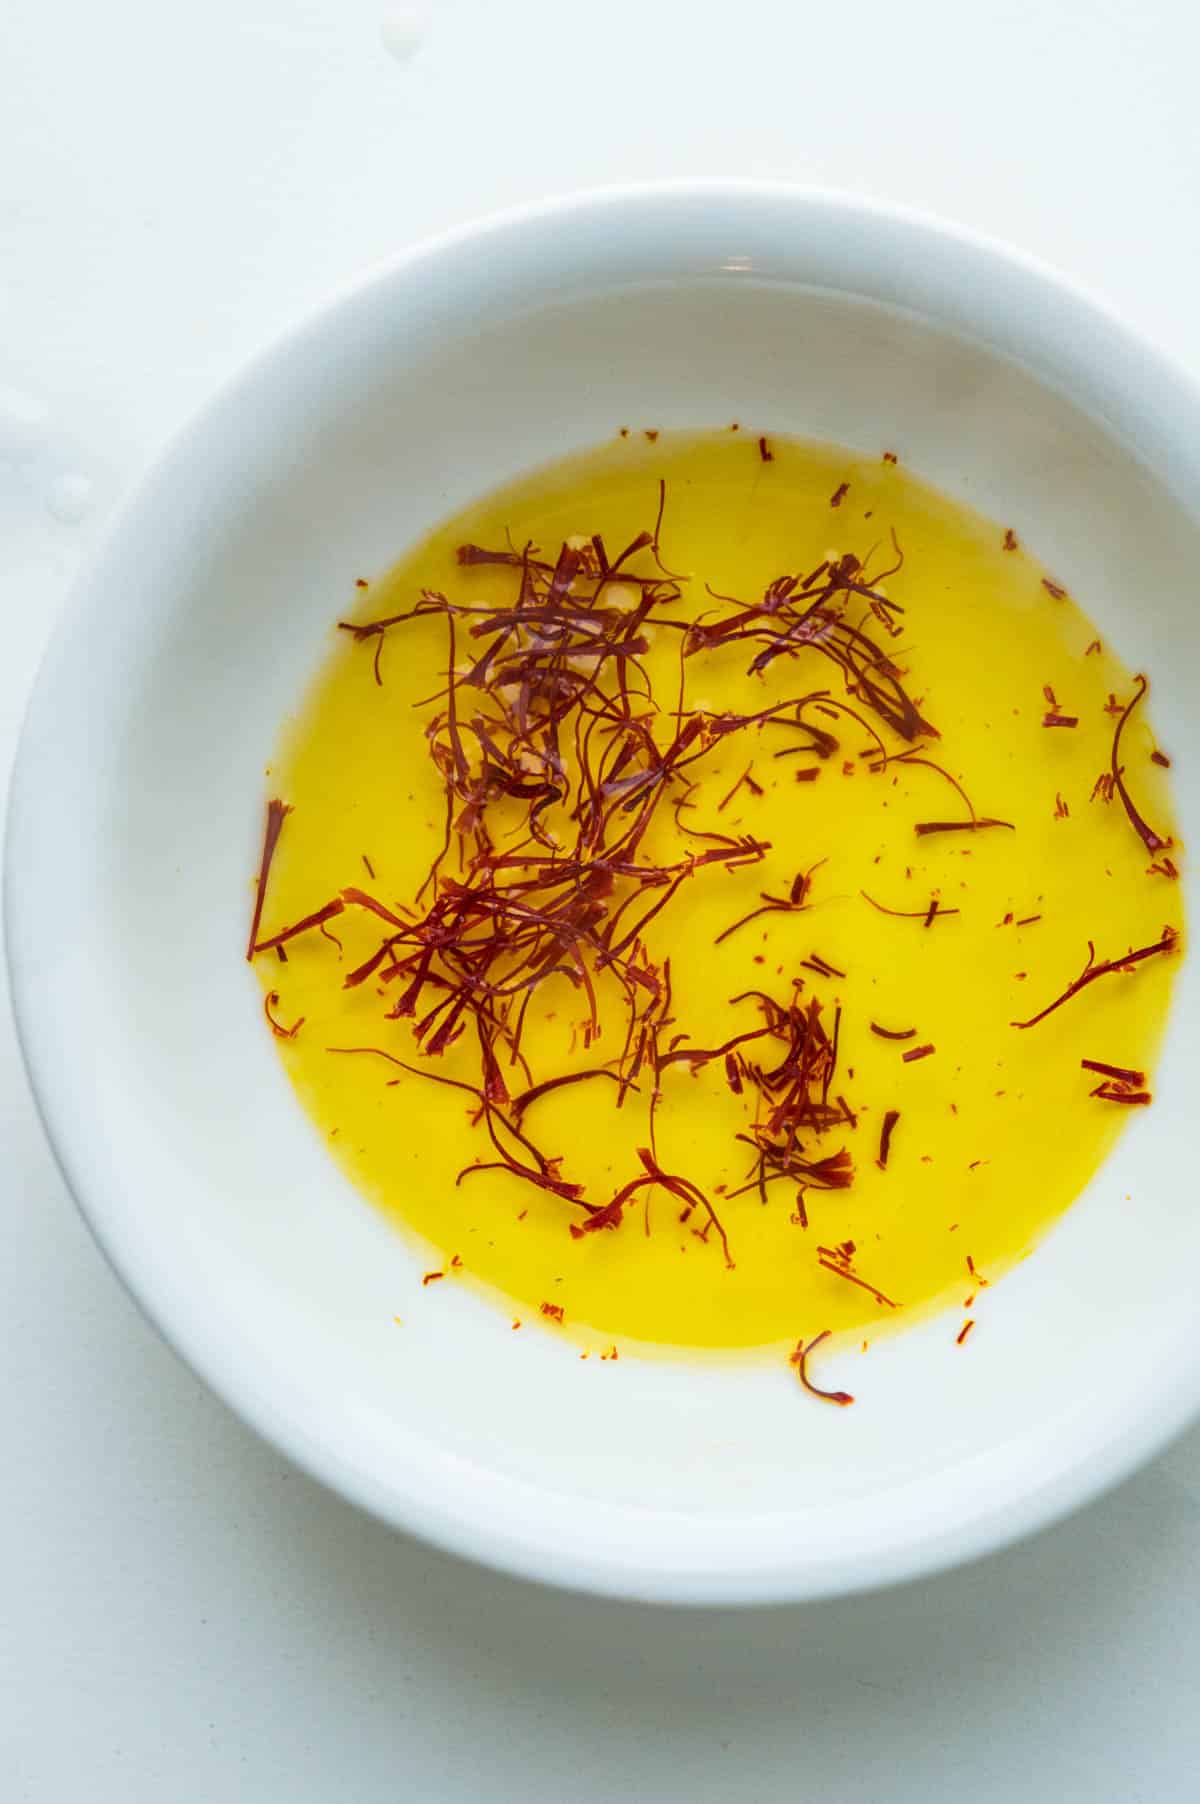 The saffron after steeping for several minutes.